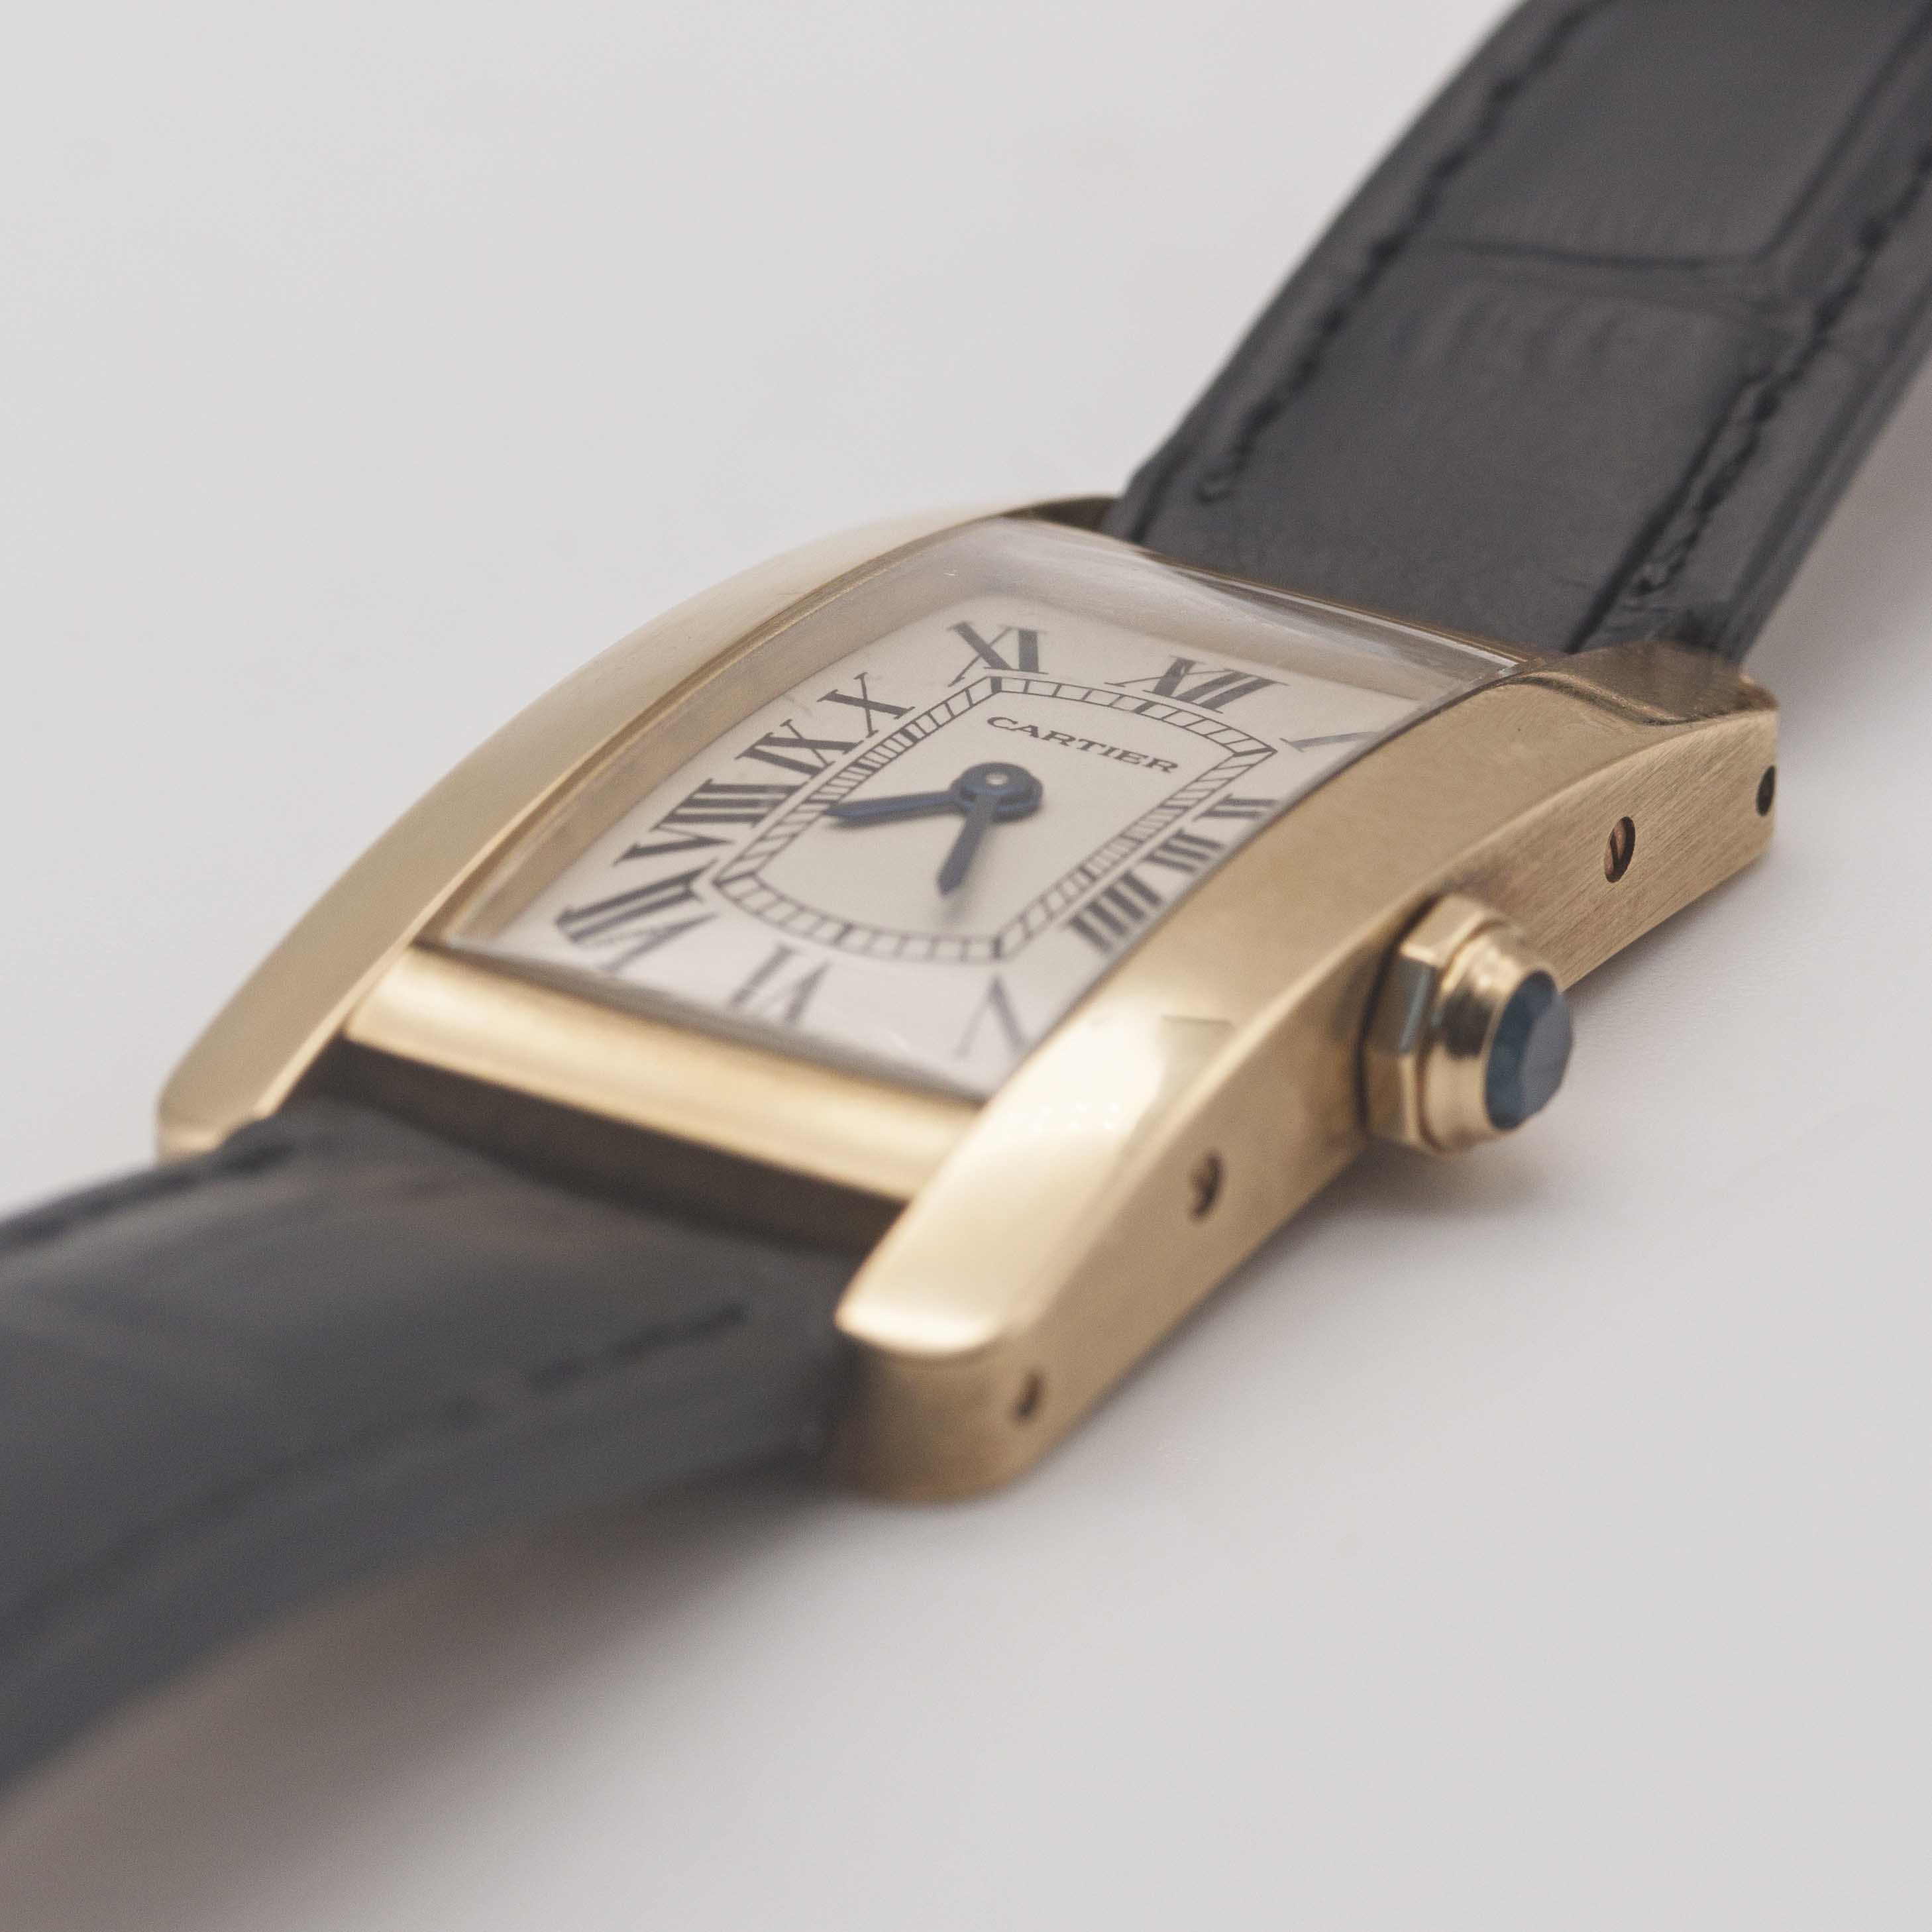 A LADIES 18K SOLID YELLOW GOLD CARTIER TANK AMERICAINE WRIST WATCH DATED 2005, REF. 2482 WITH - Image 3 of 11